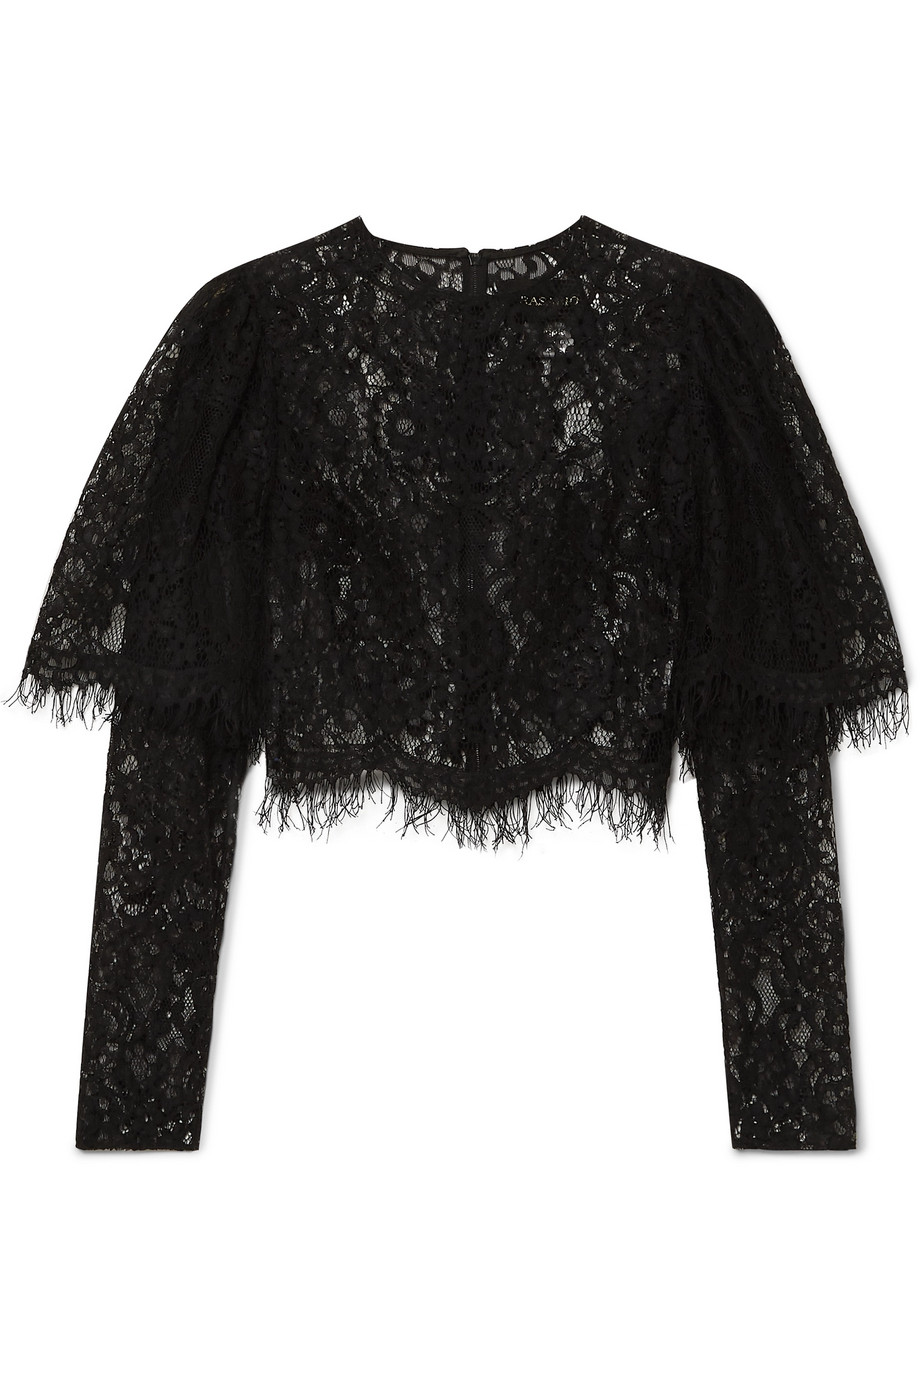 Rasario - Cropped Lace Top - Back | FASHION STYLE FAN